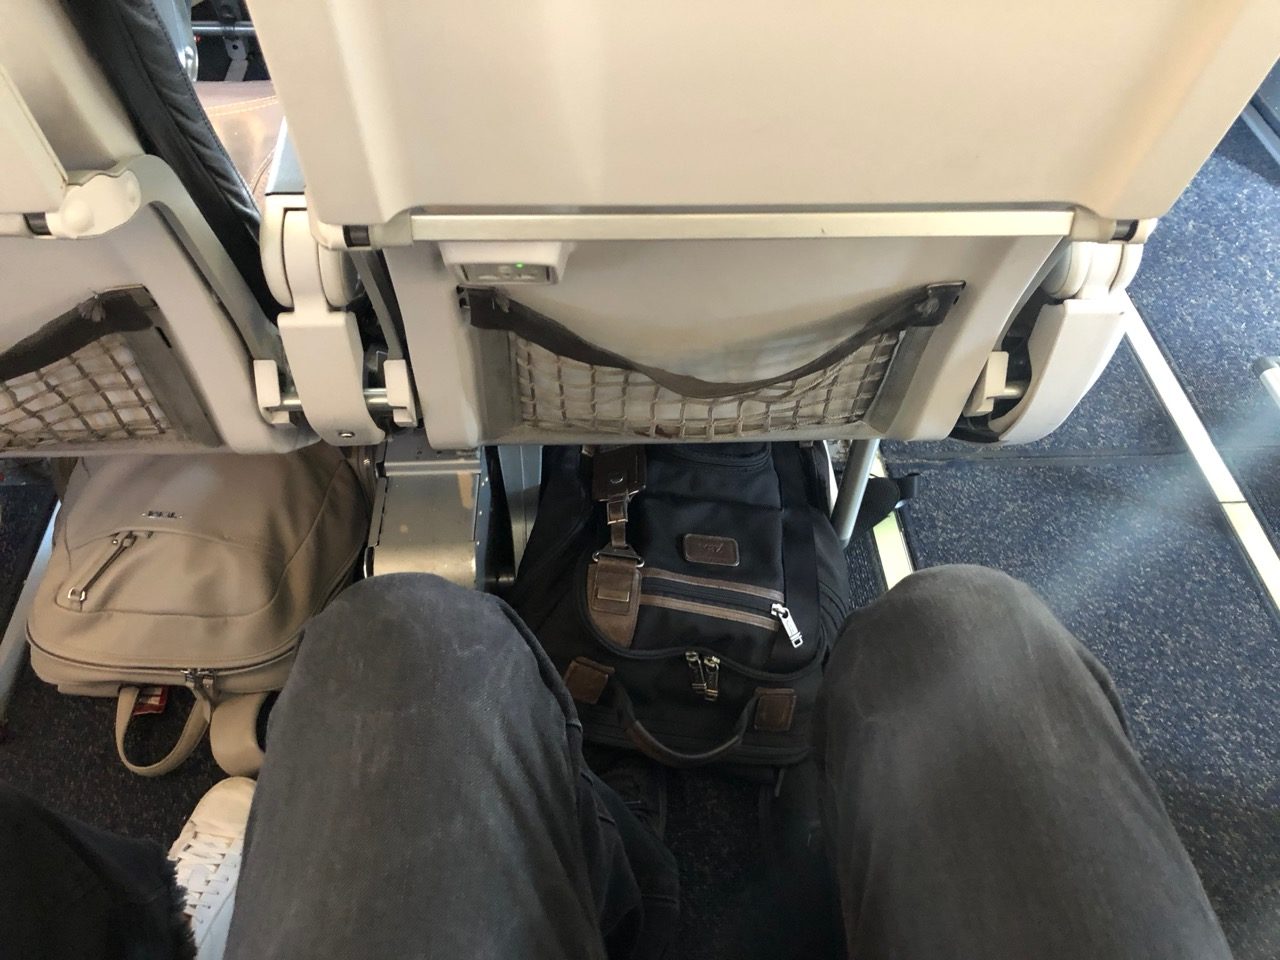 a person's legs and a backpack on a plane